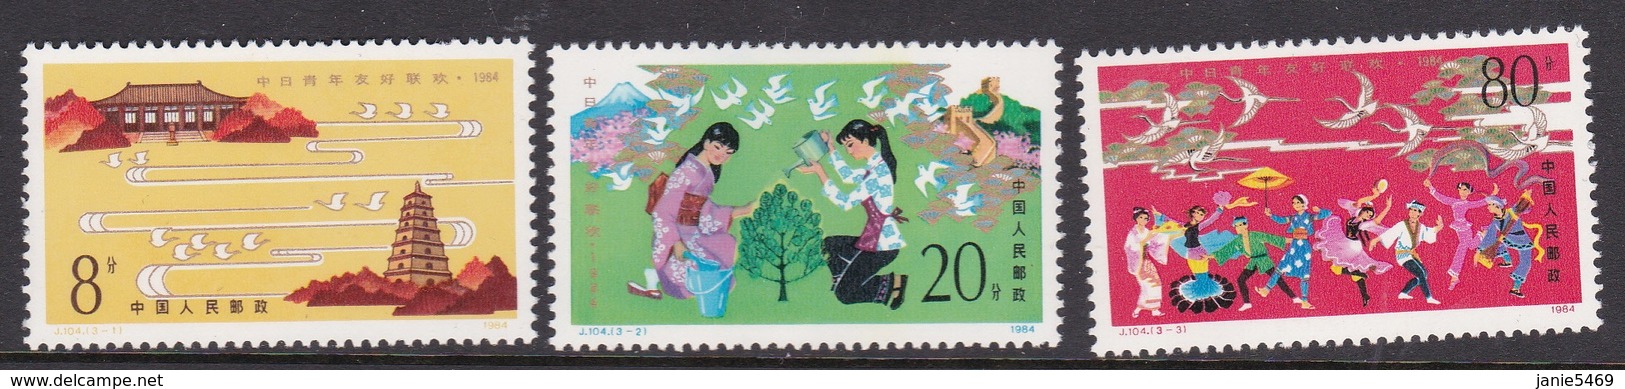 China People's Republic SG 3340-3342 1984 Youth Friendship Festival, Mint Never Hinged - Nuevos